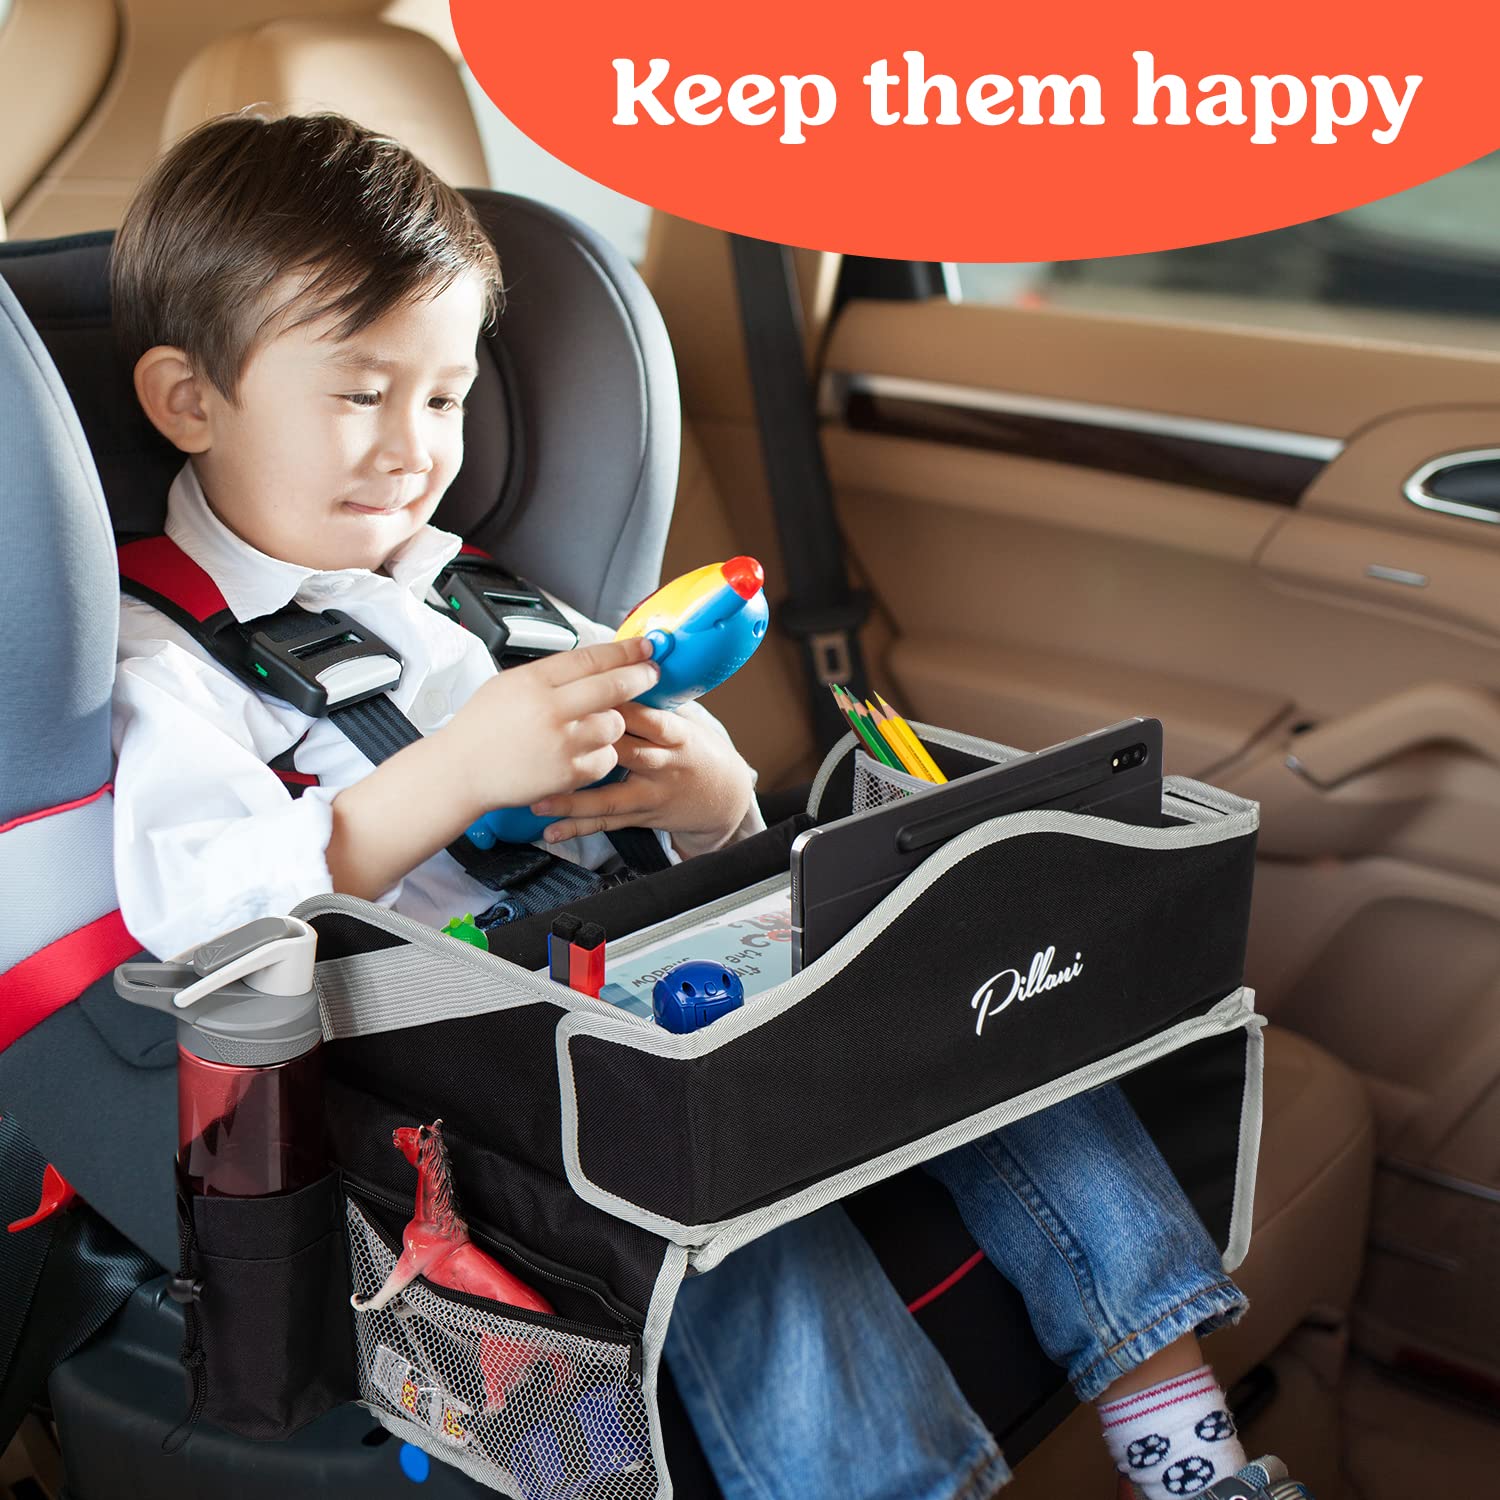 Pillani Kids Car Seat Tray for Travel, Roadtrip Essentials, Carseat Table Tray for Road Trip Activities - Toddler Lap Desk Organizer for Airplane